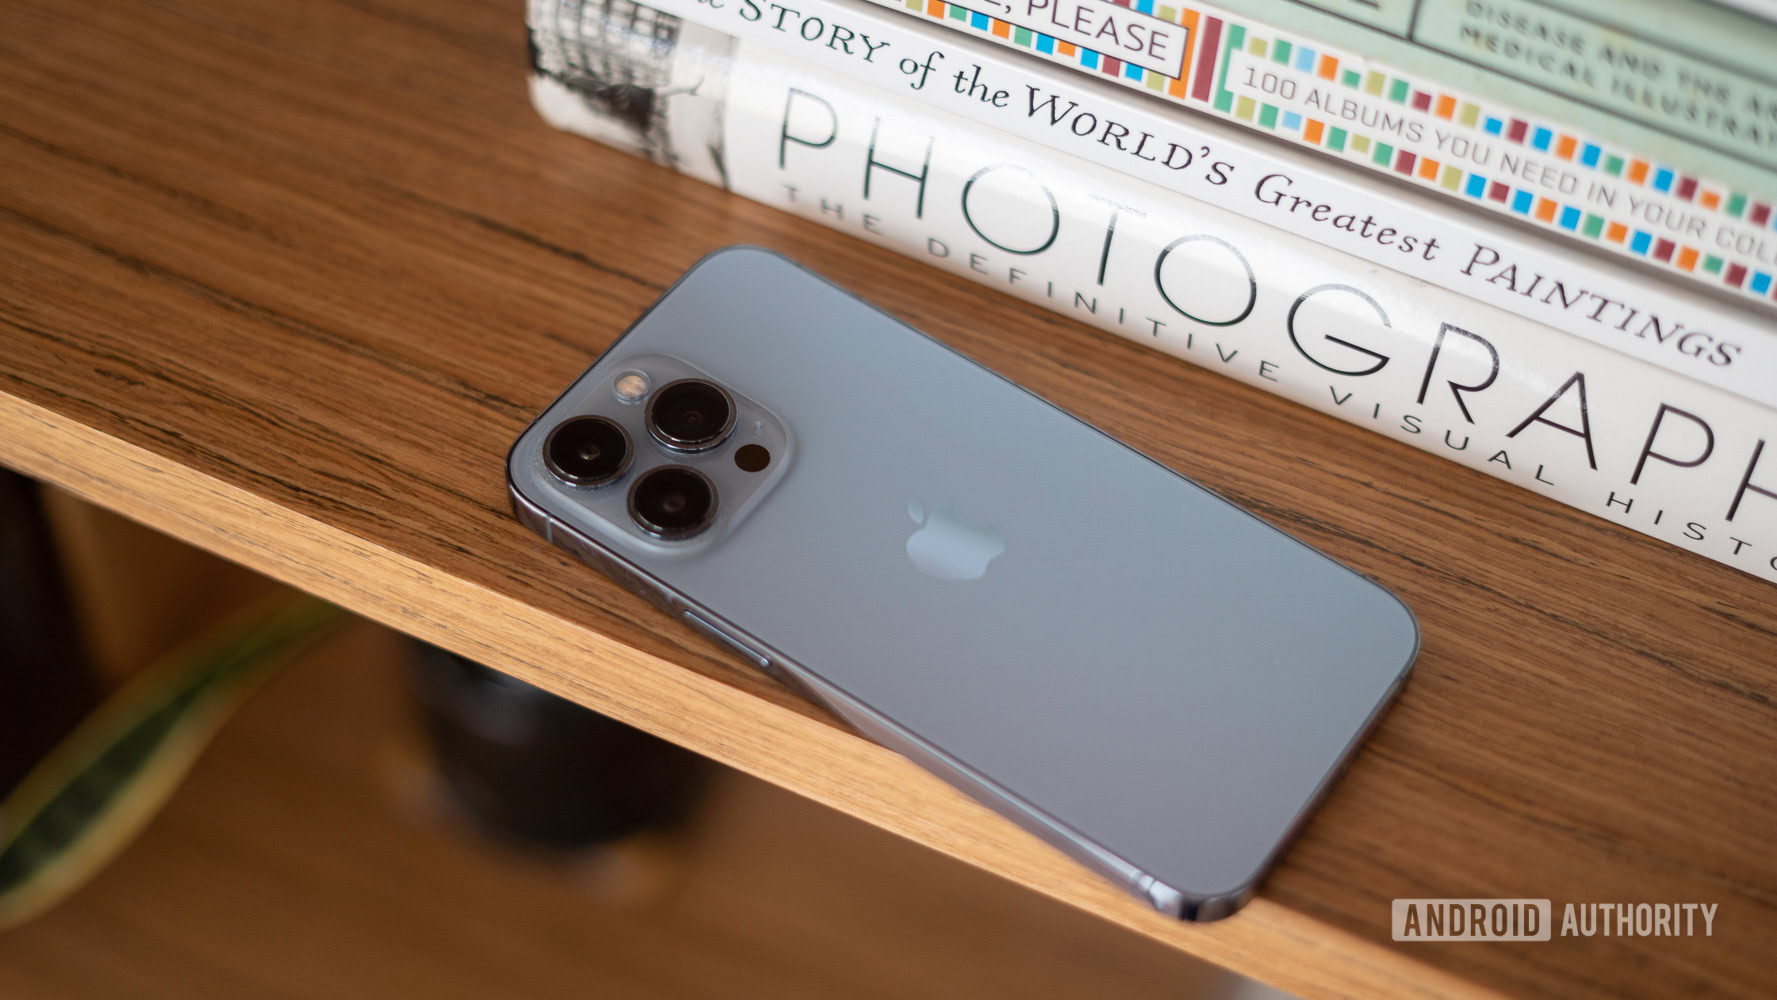 iPhone 13 Pro: Buyer's Guide, Should You Buy?